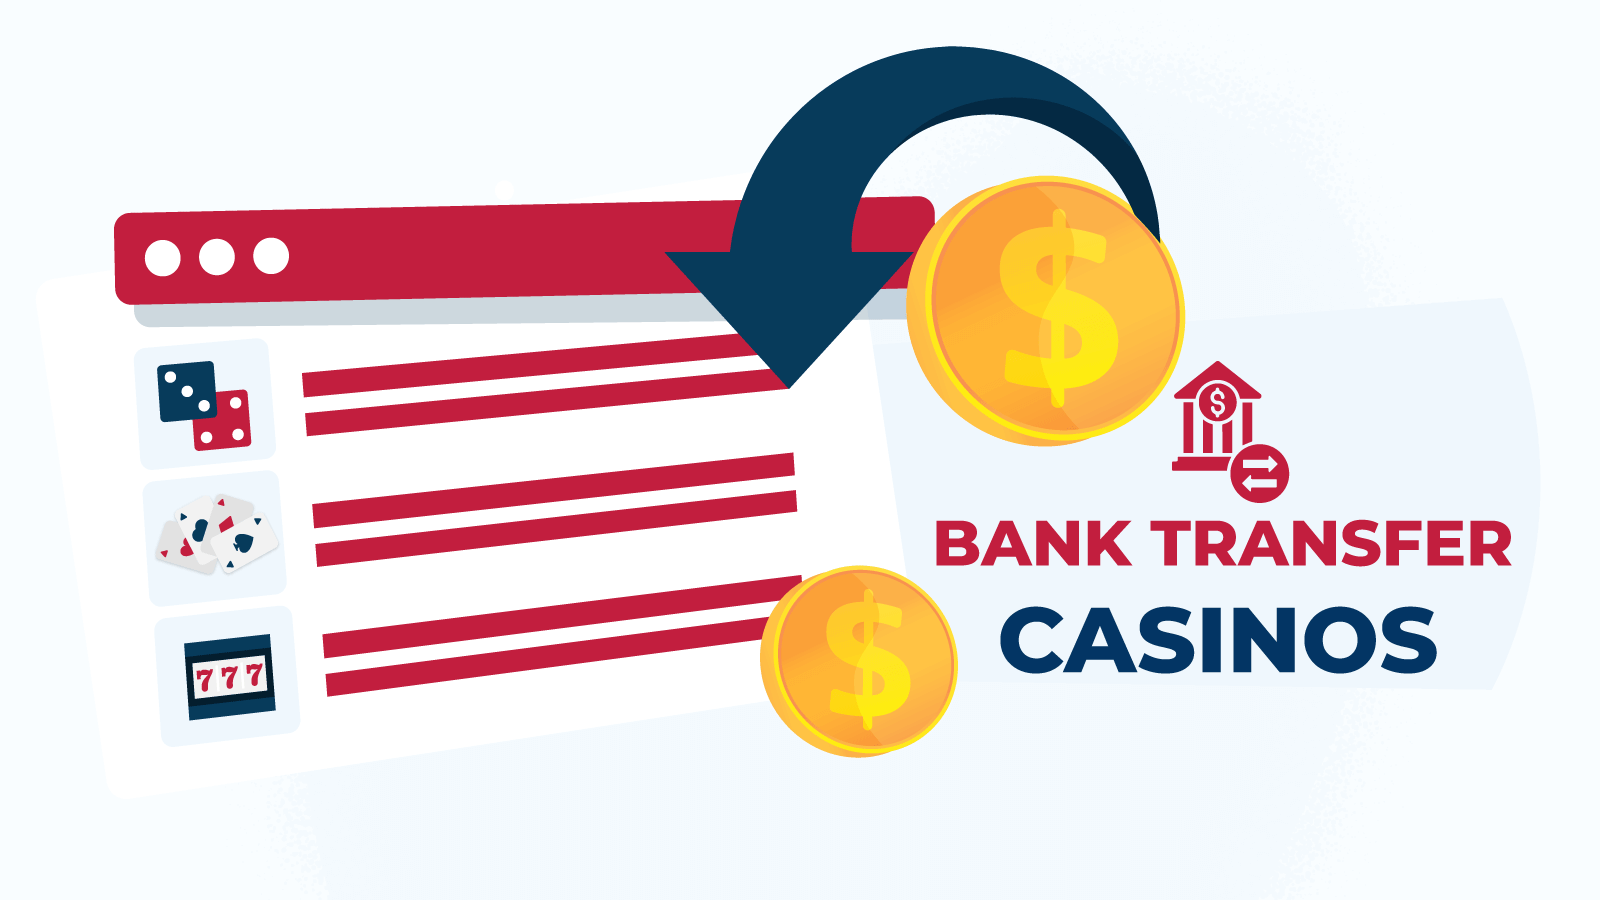 About Casinos With Bank Transfer